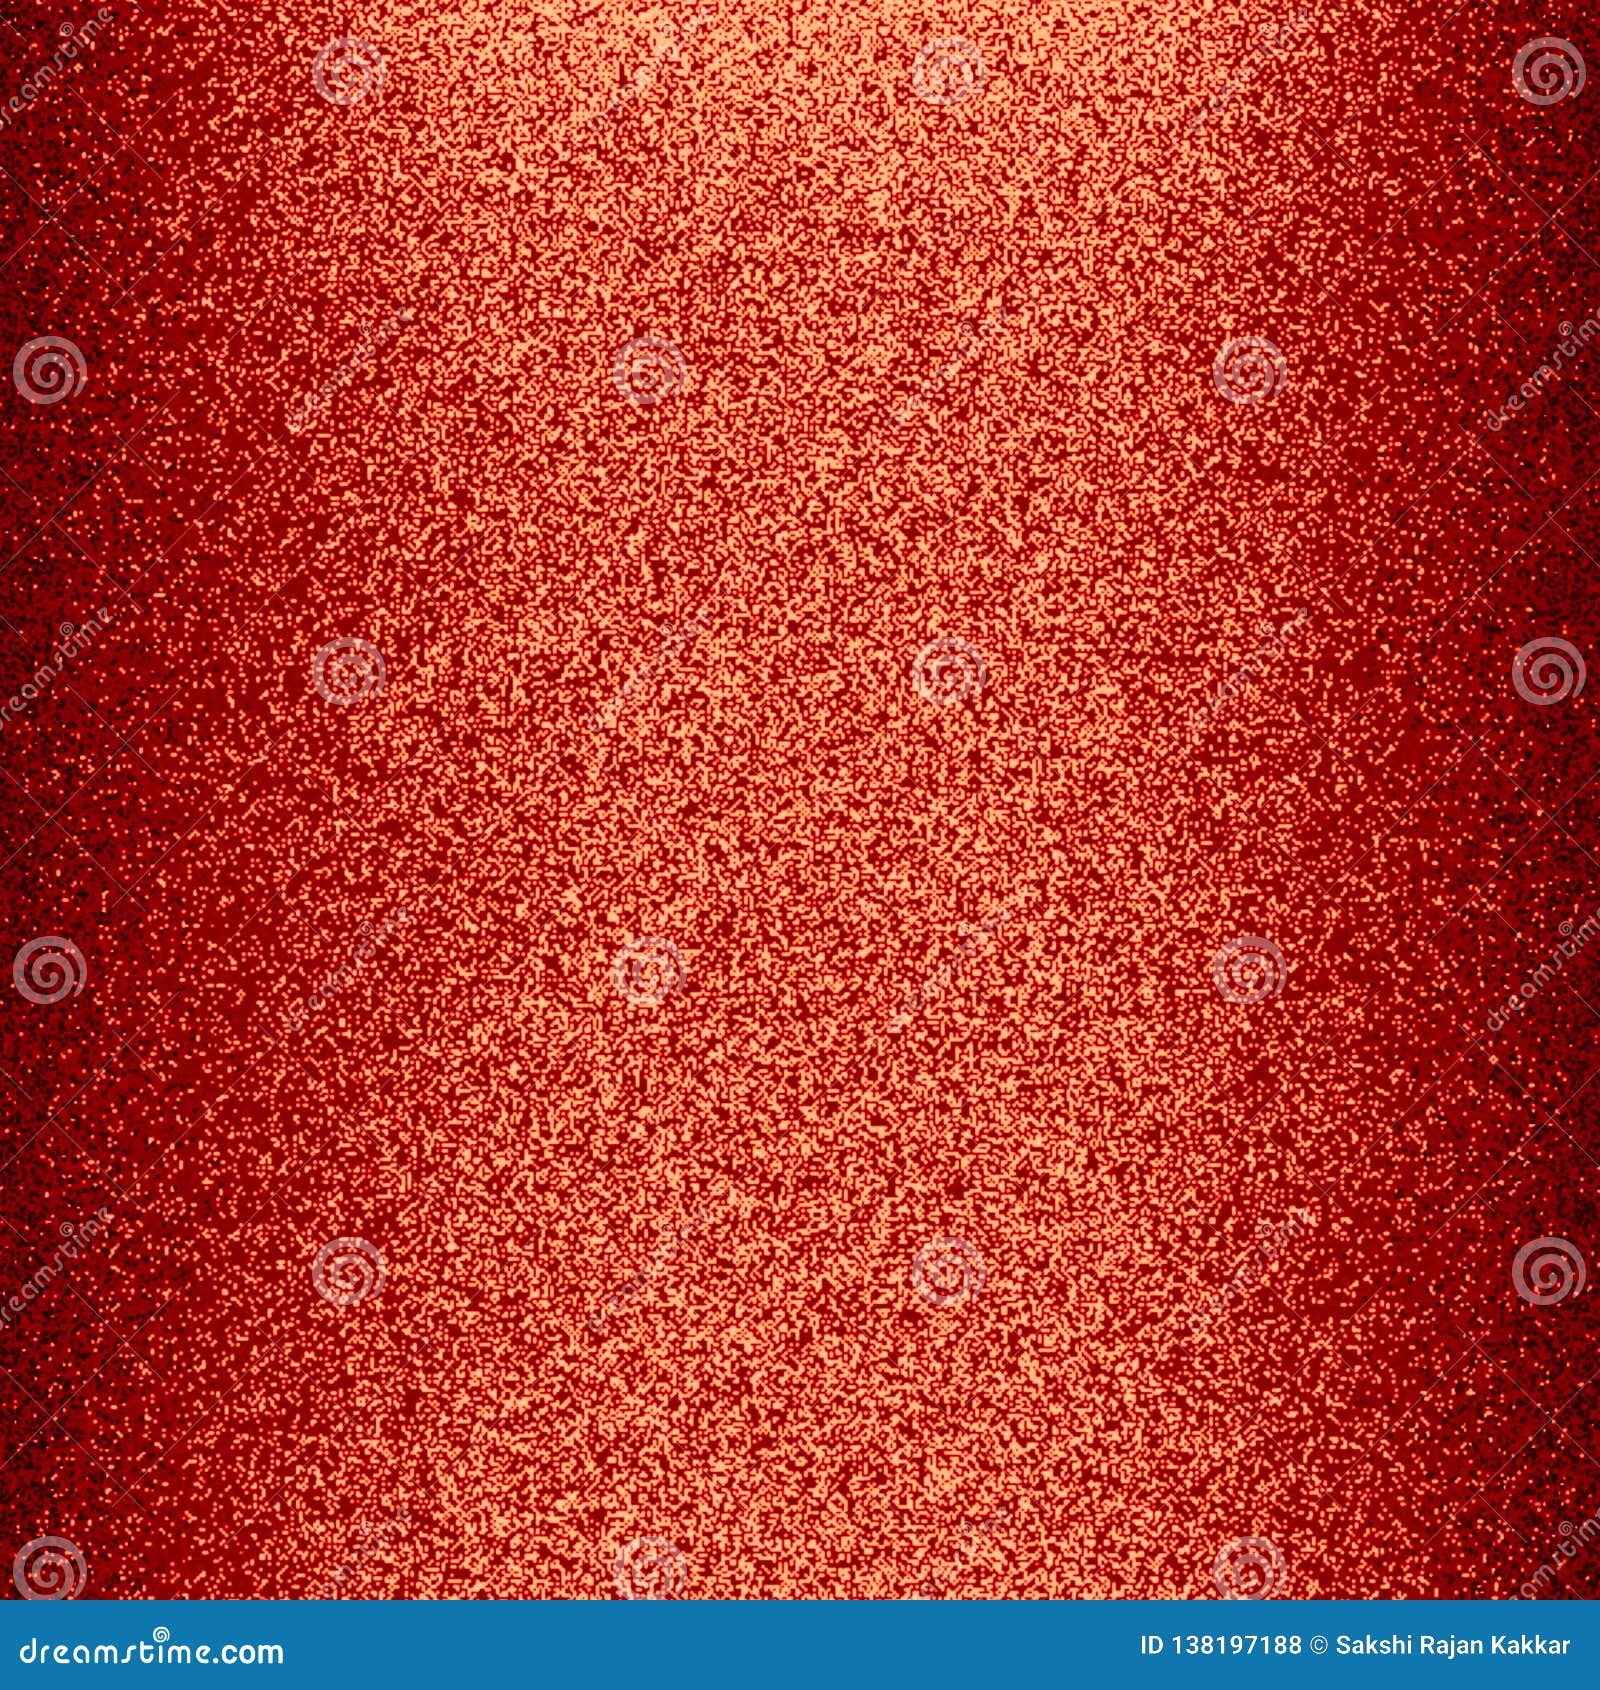 Dark Red Color Glossy and Shining Glitter Paper with Light and 3 D Effect  Computer Generated Background Image and Wallpaper Design Stock Illustration  - Illustration of generated, background: 138197188